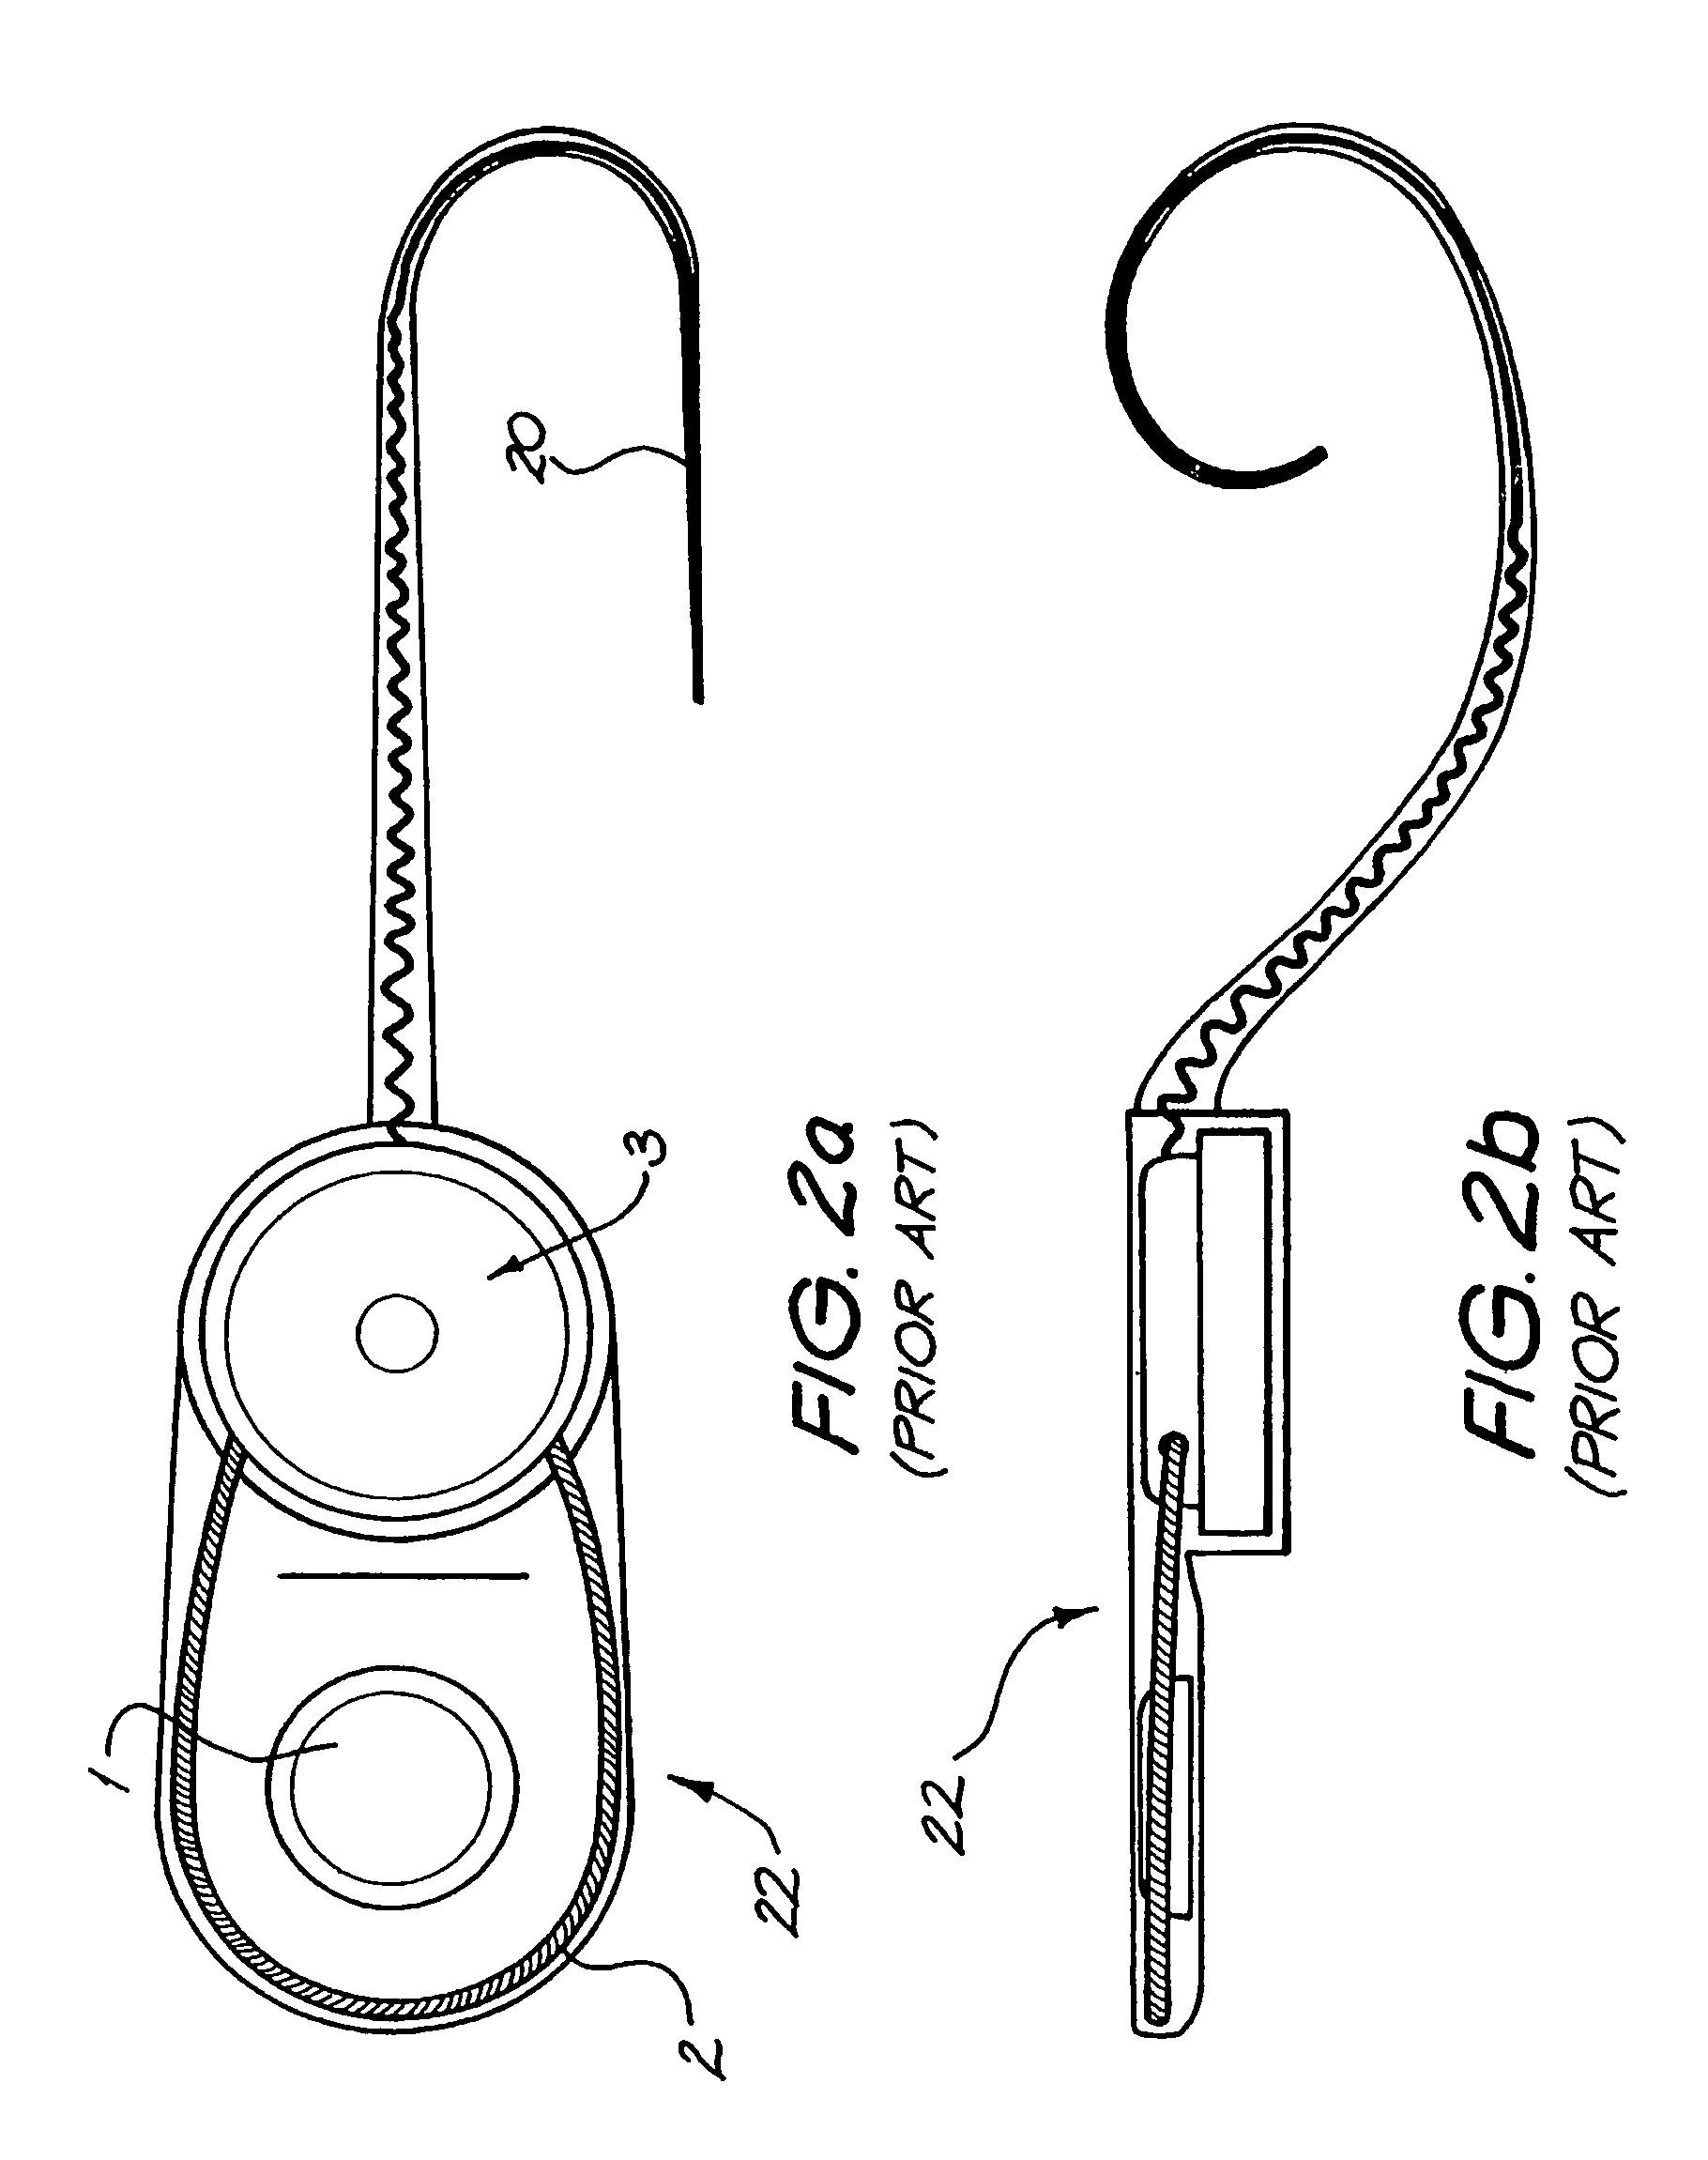 Cochlear implant having a repositionable implantable housing